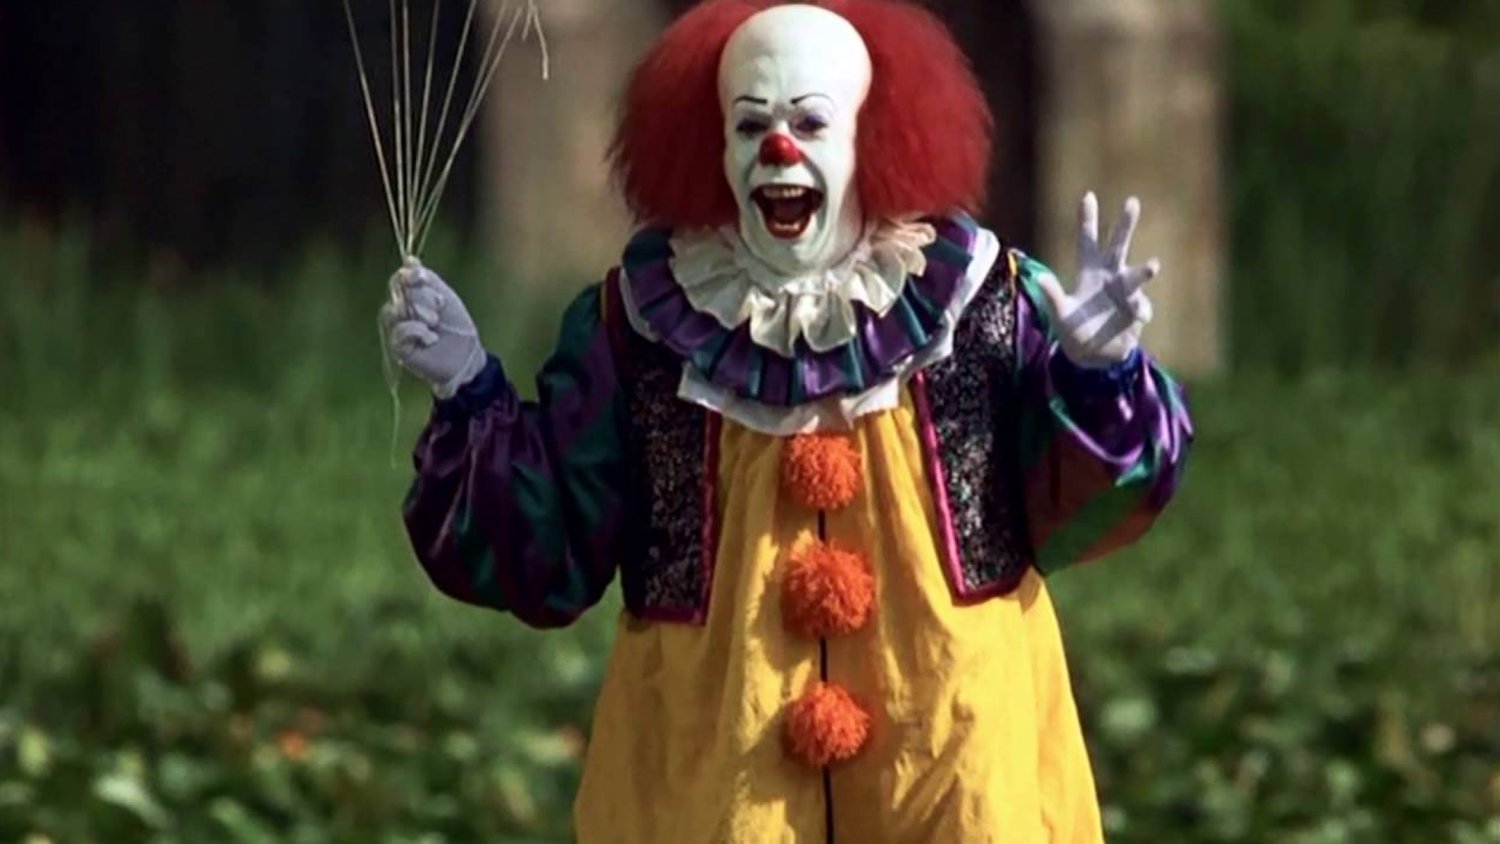 A New Documentary is in Development That Explores Stephen King's IT ...